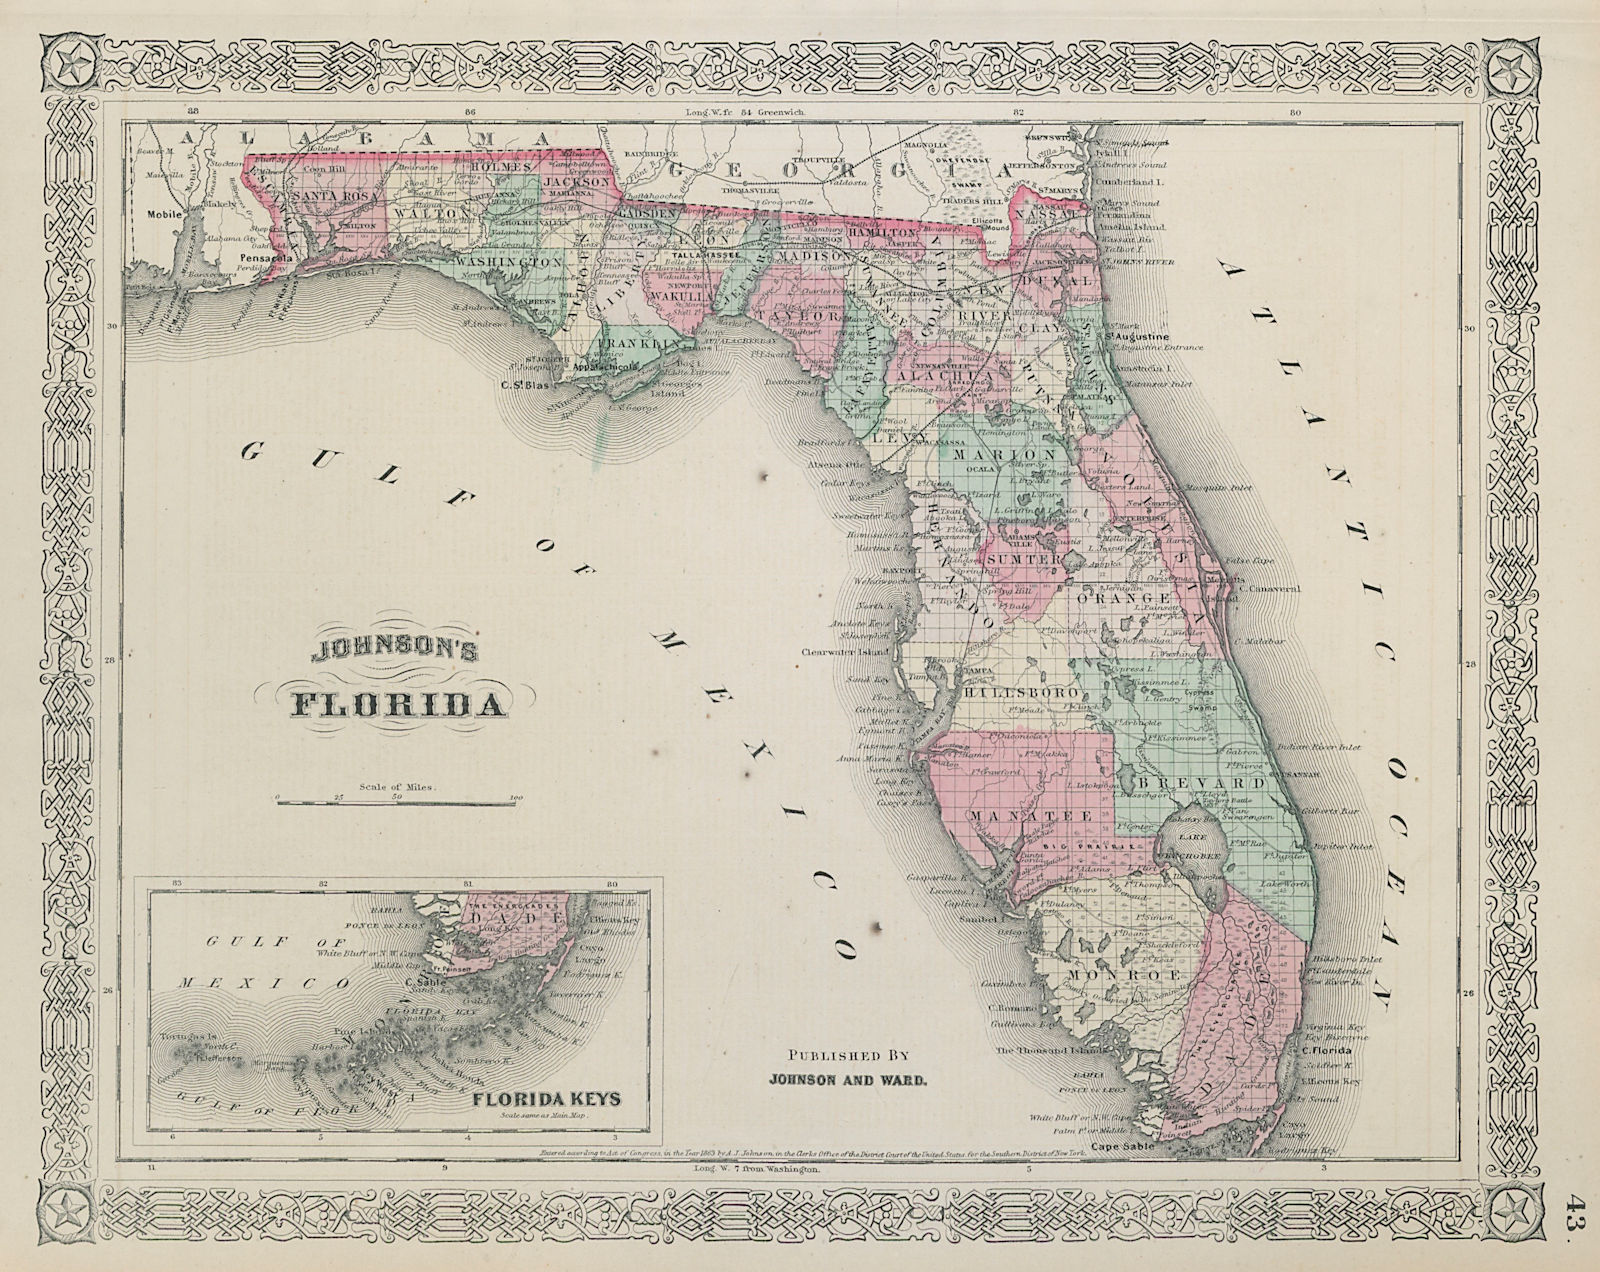 Johnson's Florida. Florida Keys. US state map showing counties 1865 old